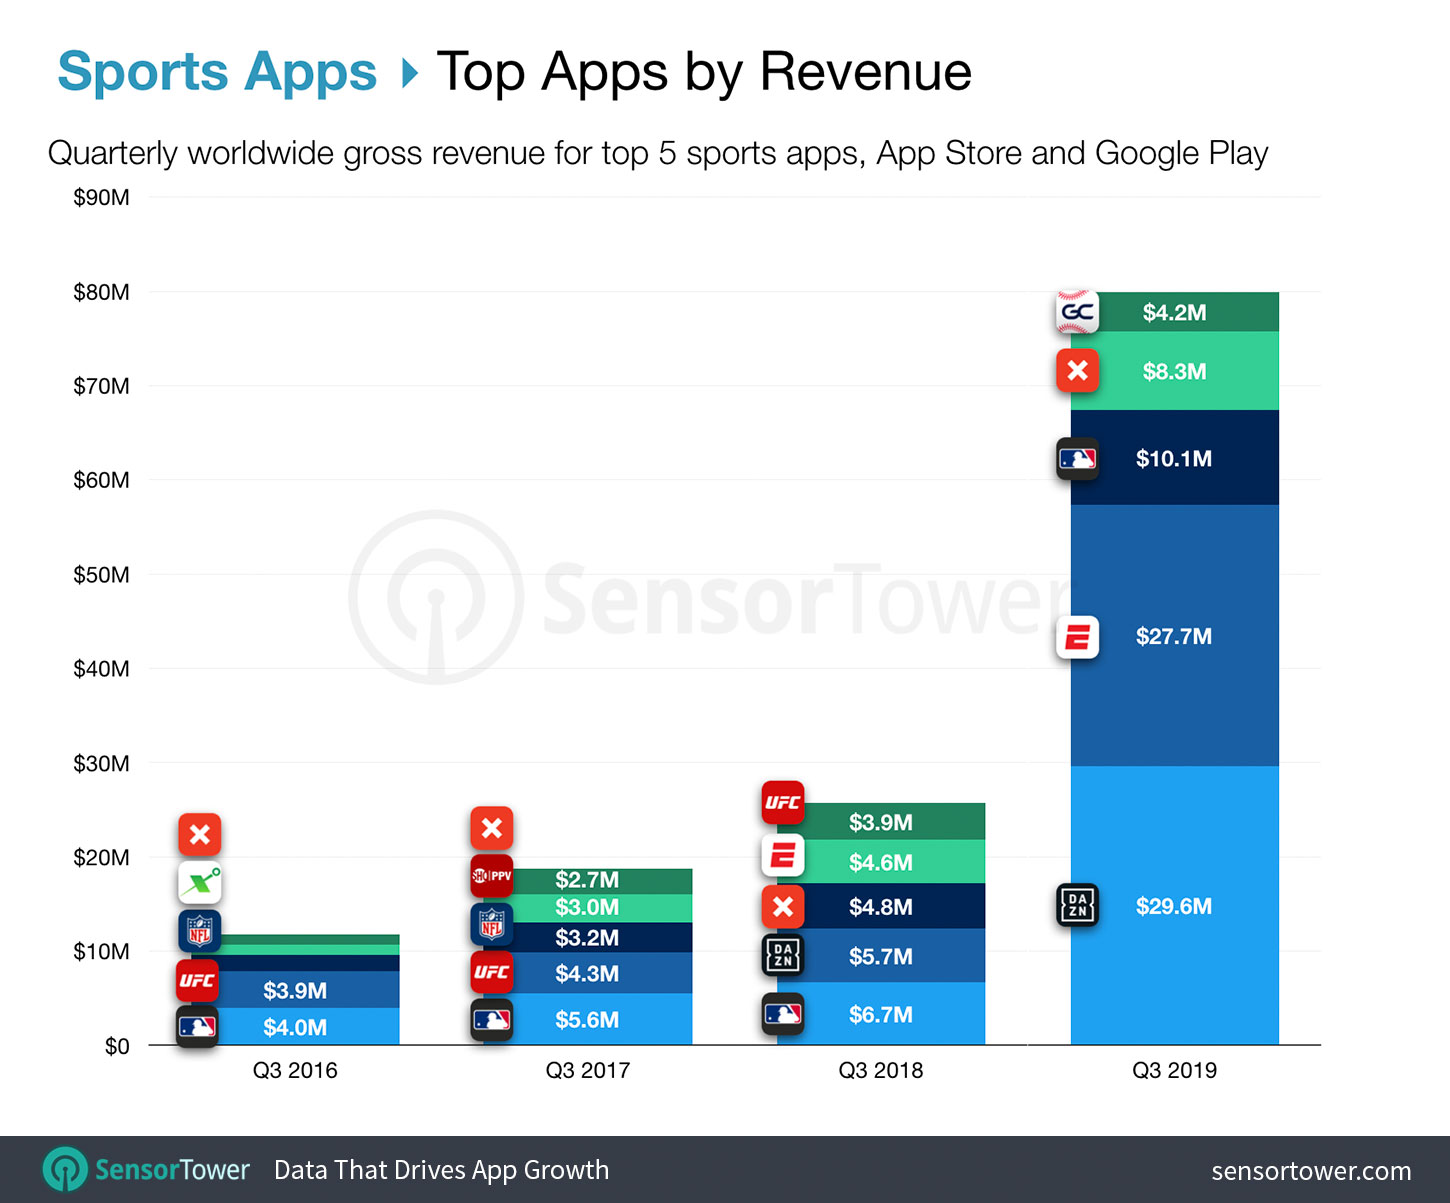 Top Sports Apps Worldwide by Revenue for Q3 2019